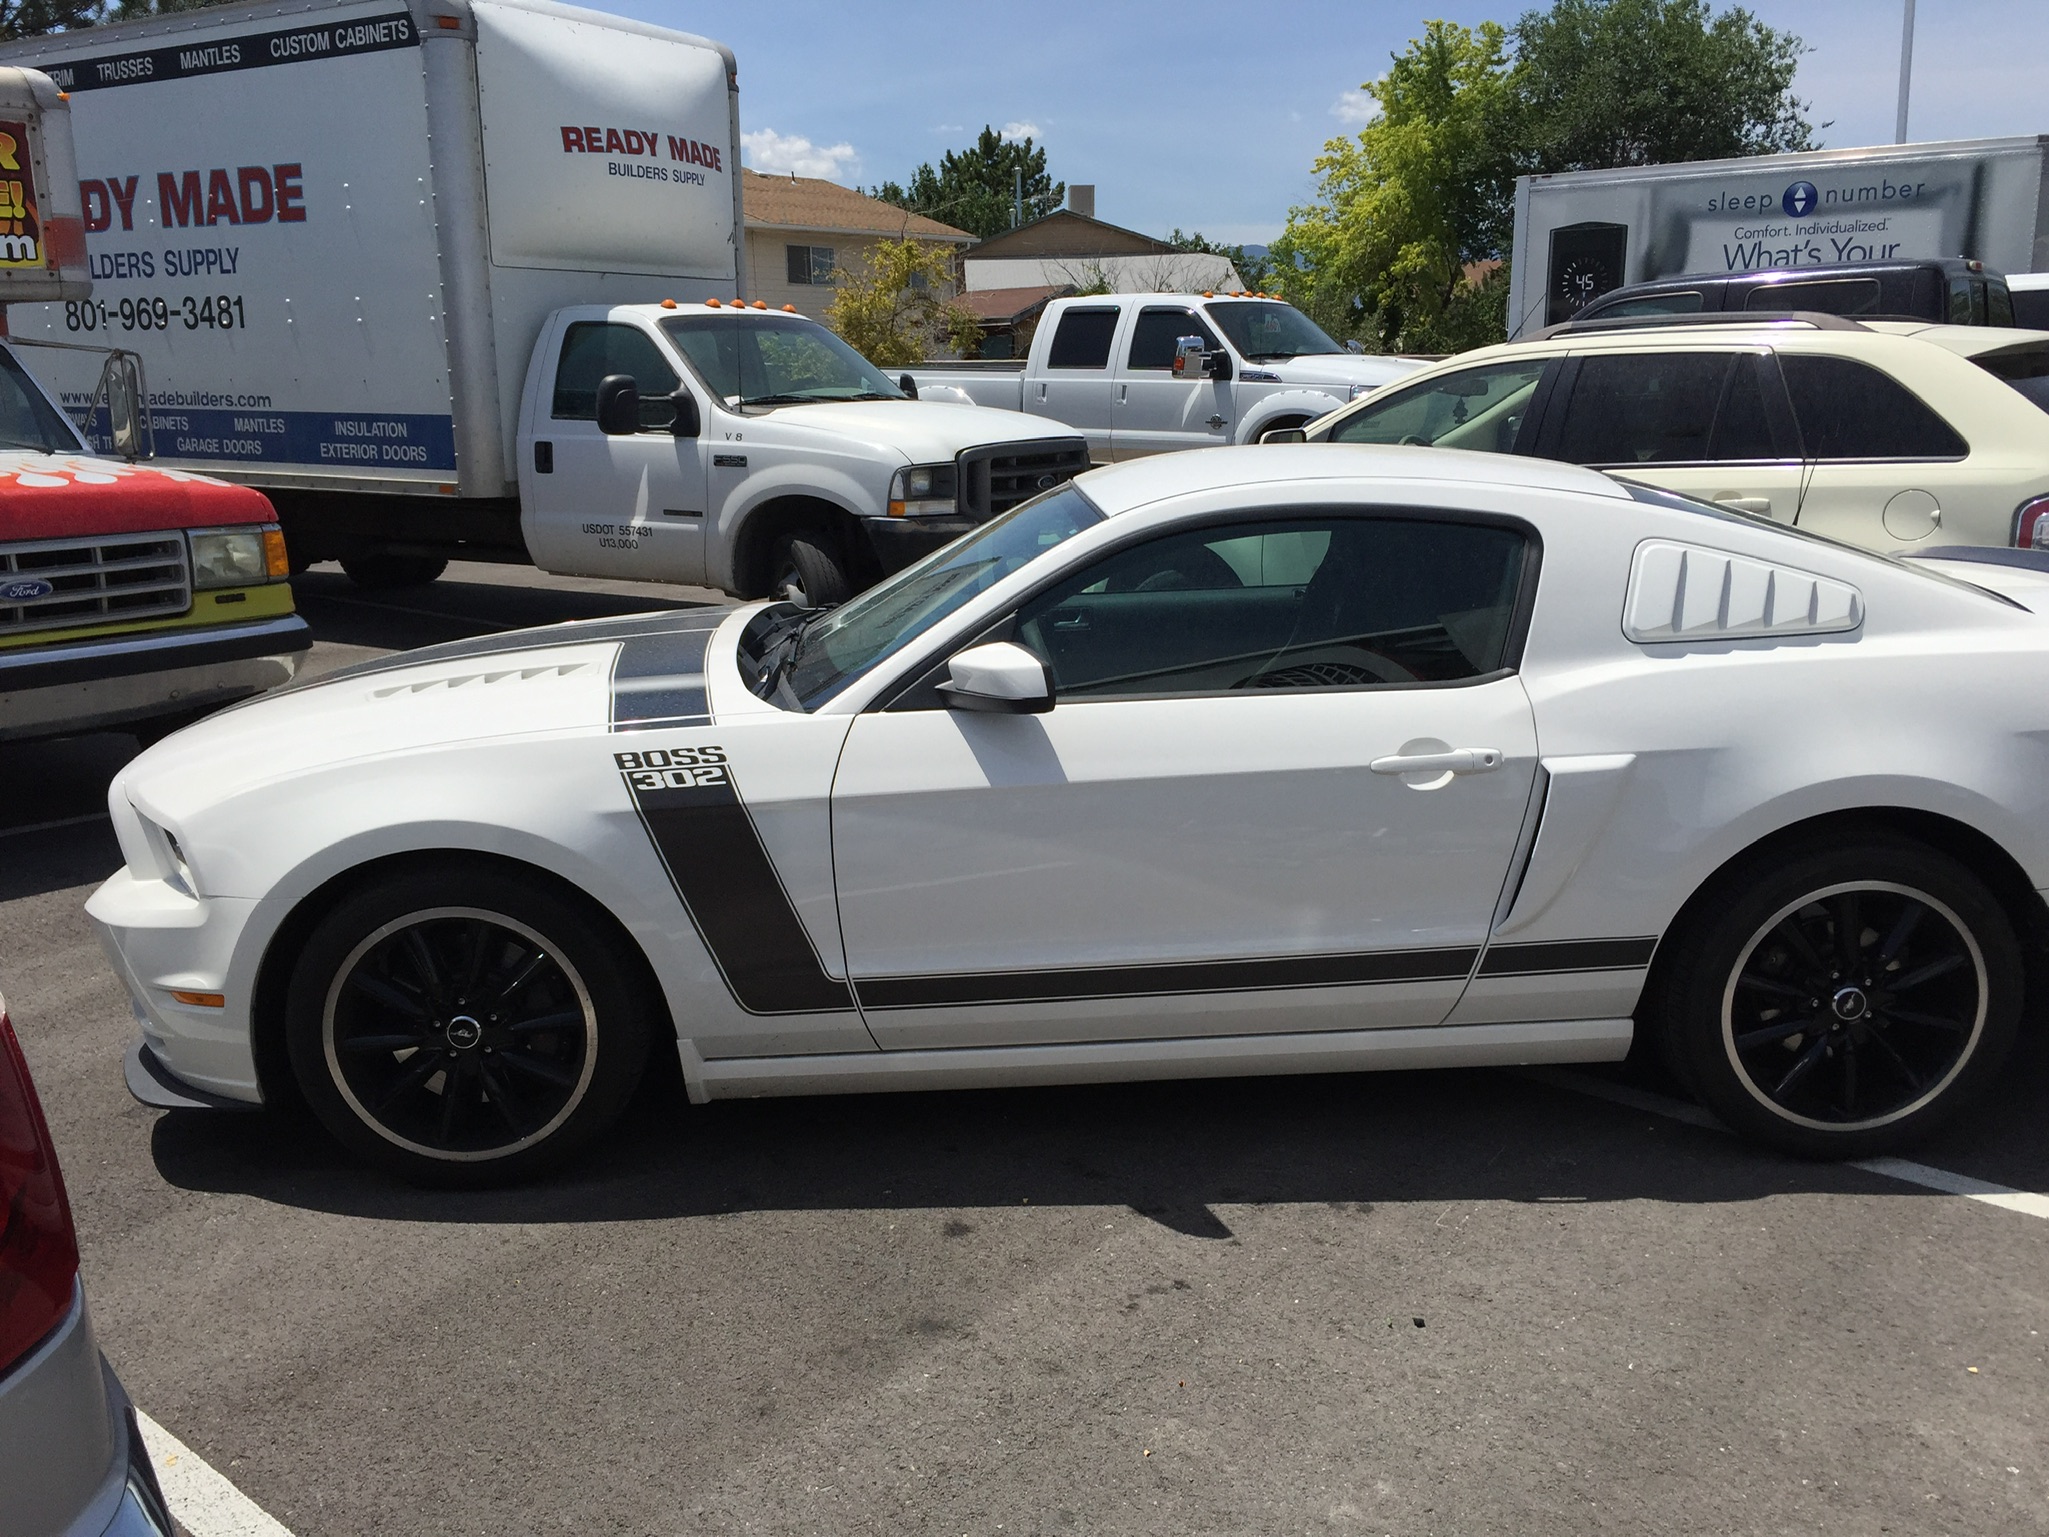 Ford Mustang Boss 302 After Wheel Painting